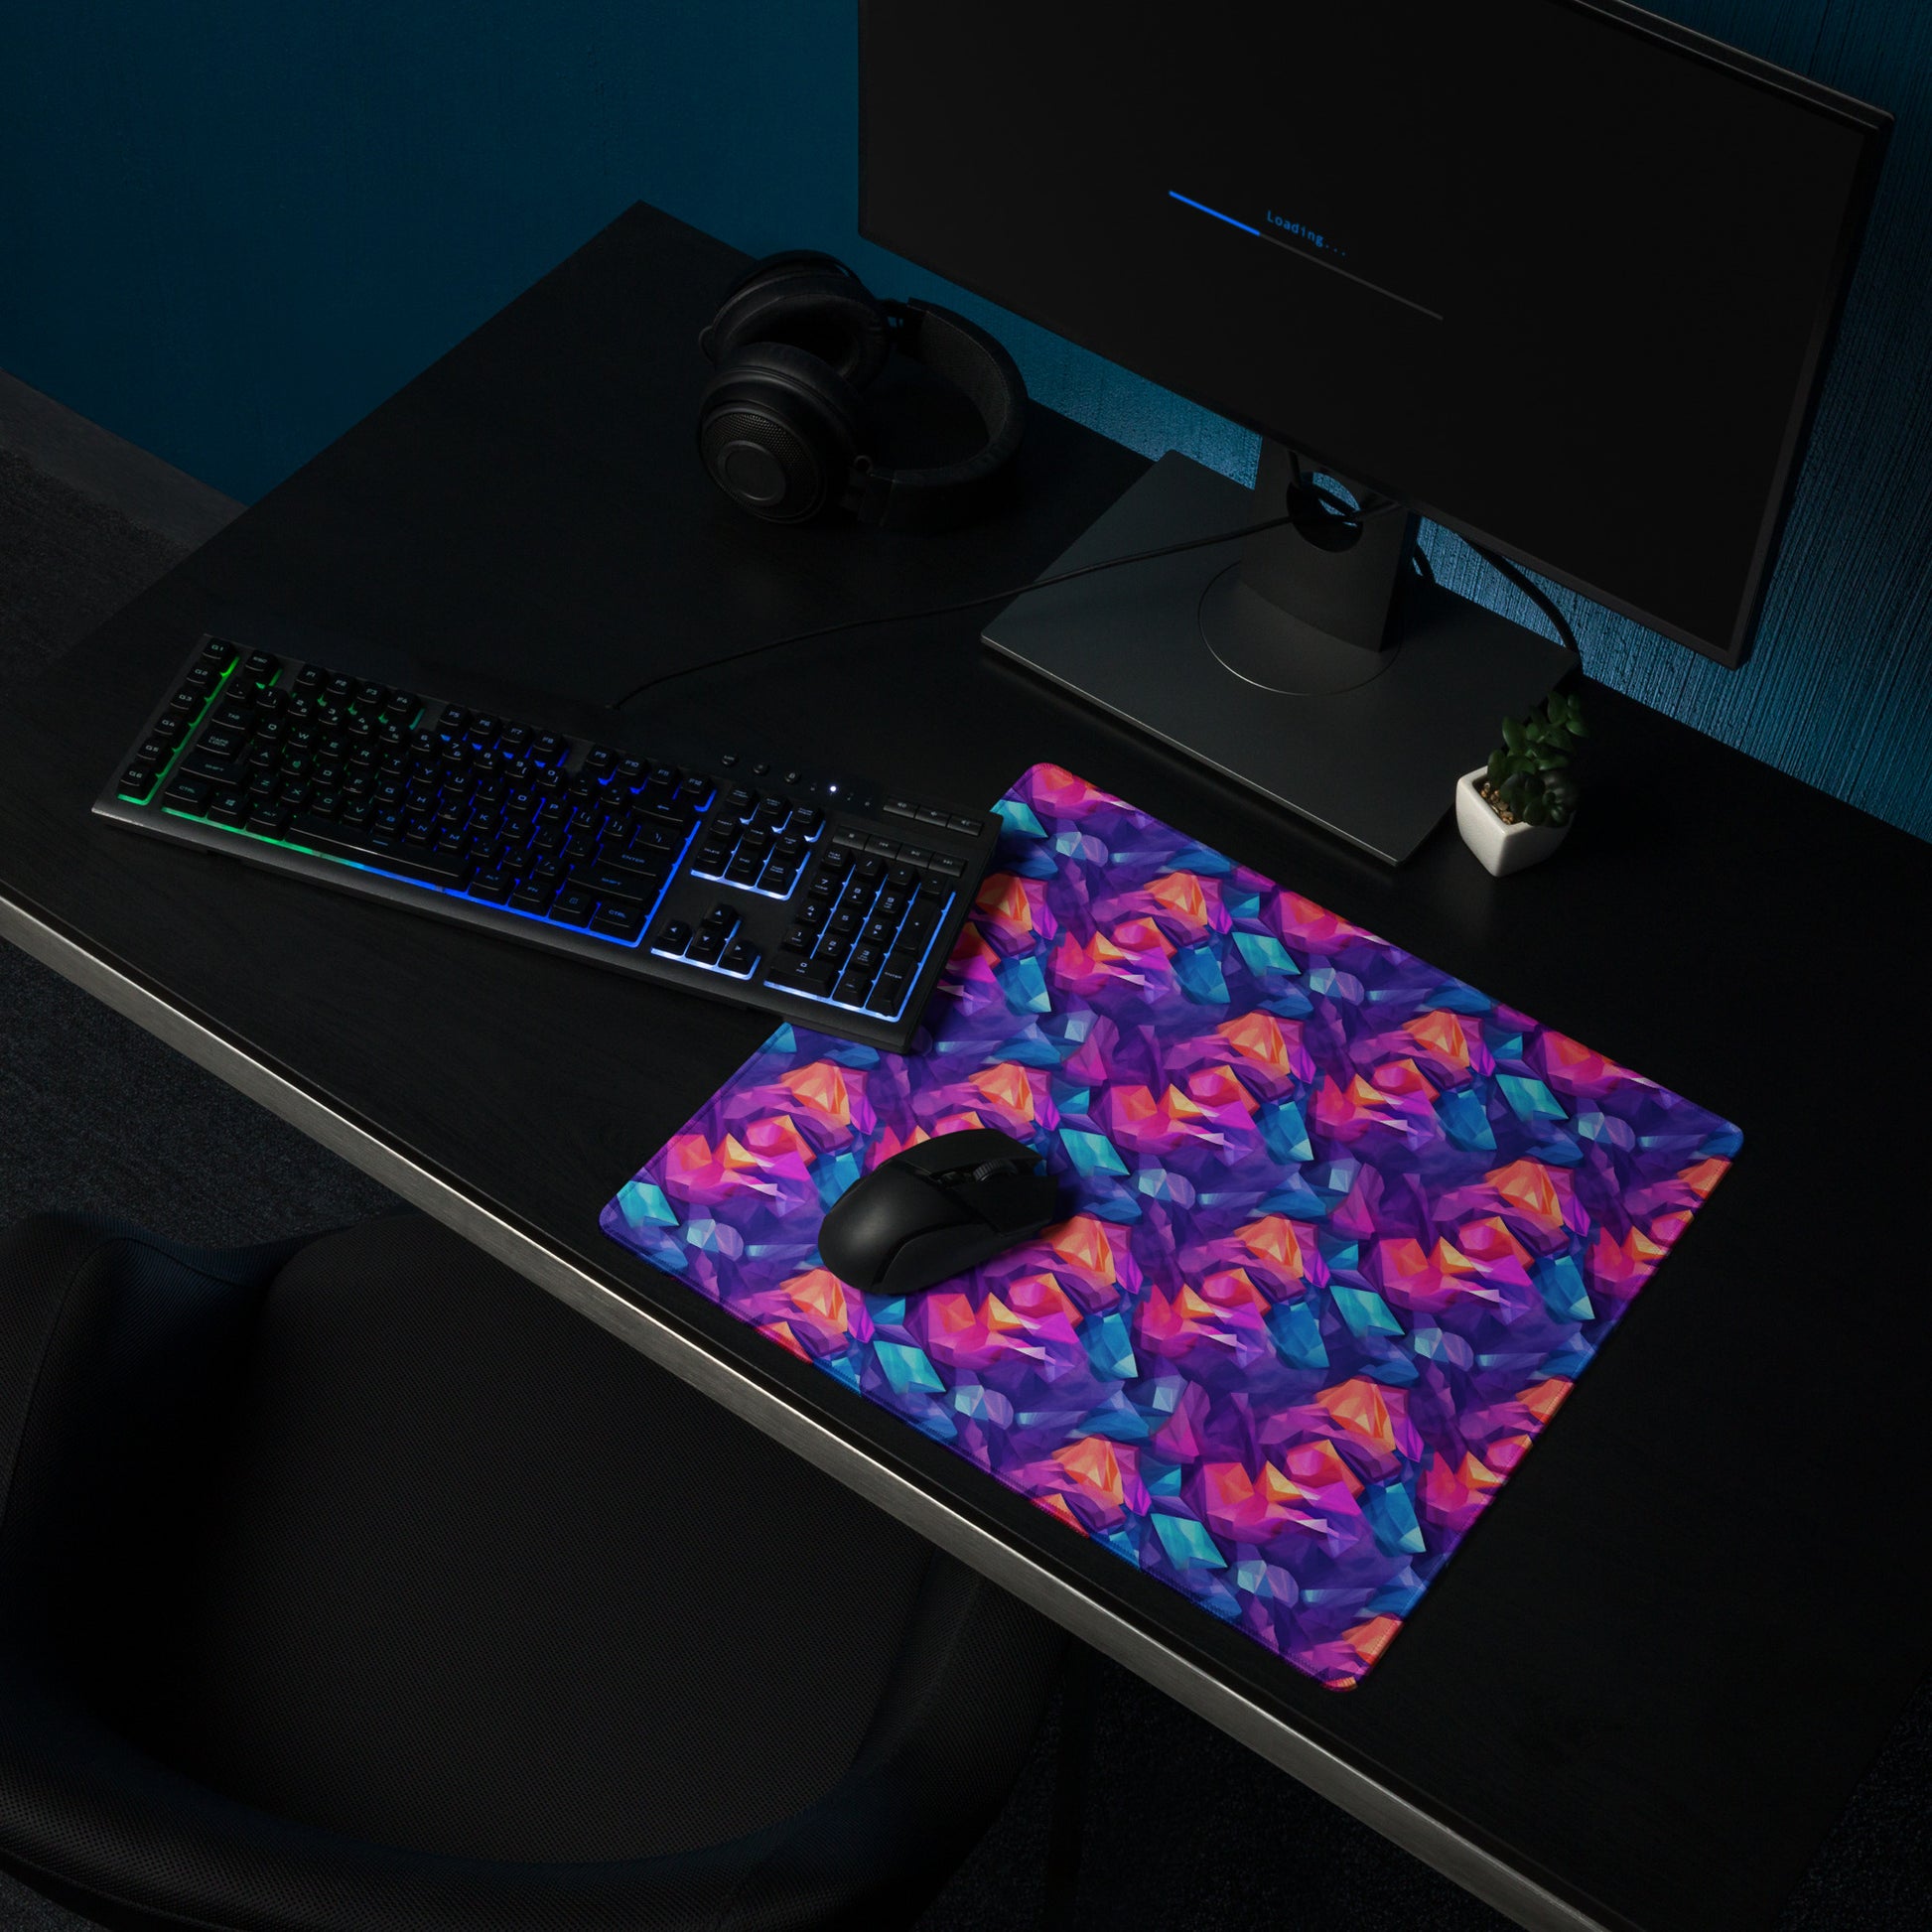 An 18" x 16" gaming desk pad with blue, purple, and orange crystals. A keyboard and mouse sit on it.